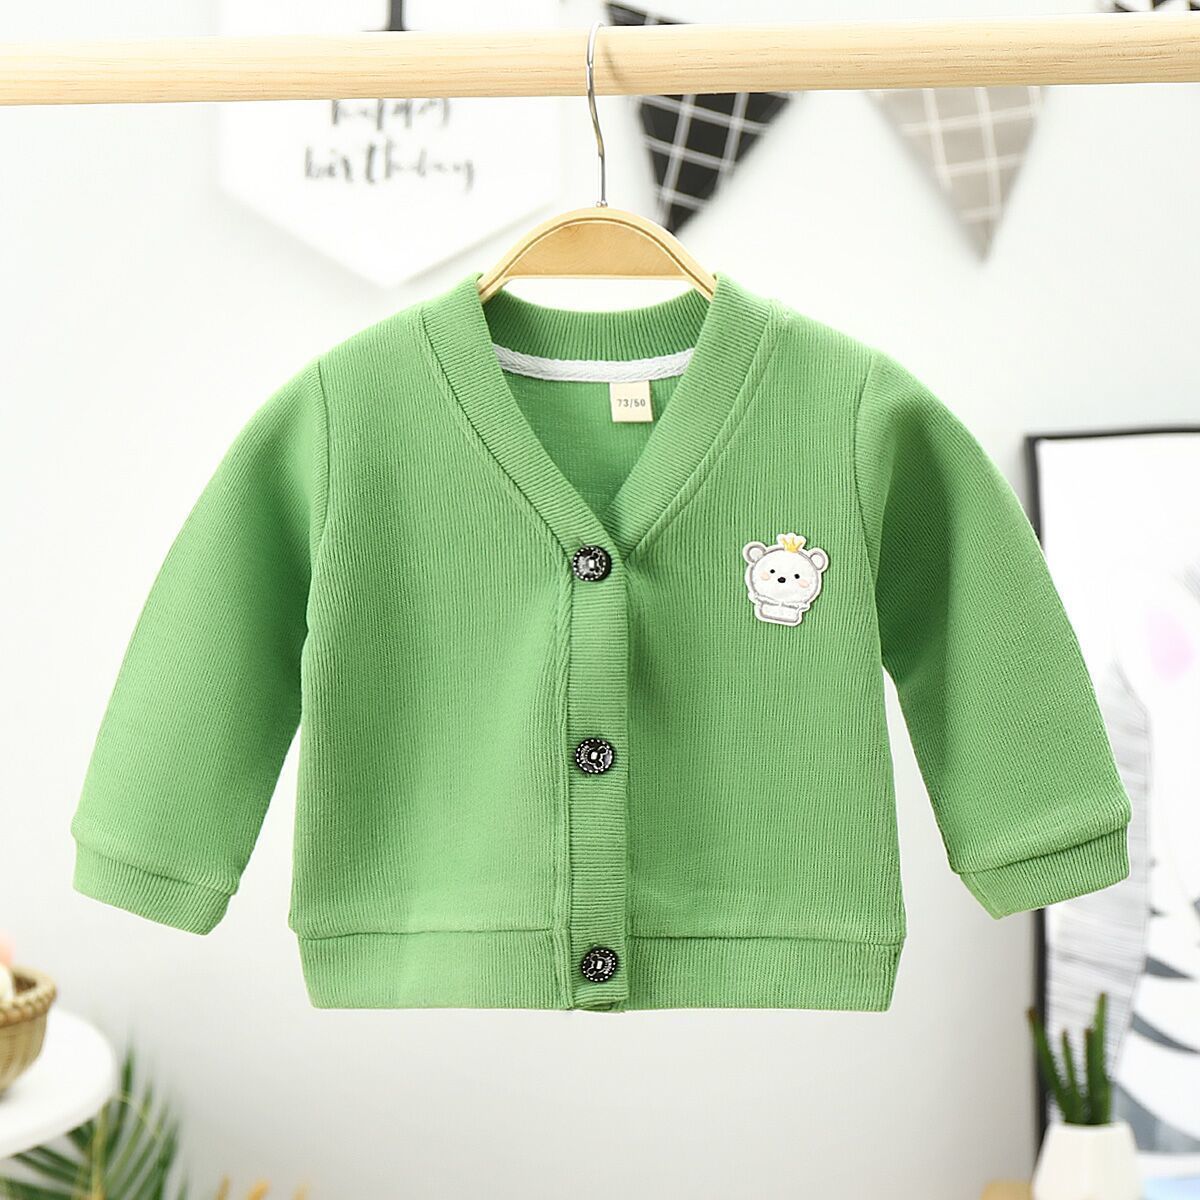 Boys' and girls' cotton coat 2020 autumn winter new infant children's sweater baby out knitted cardigan top